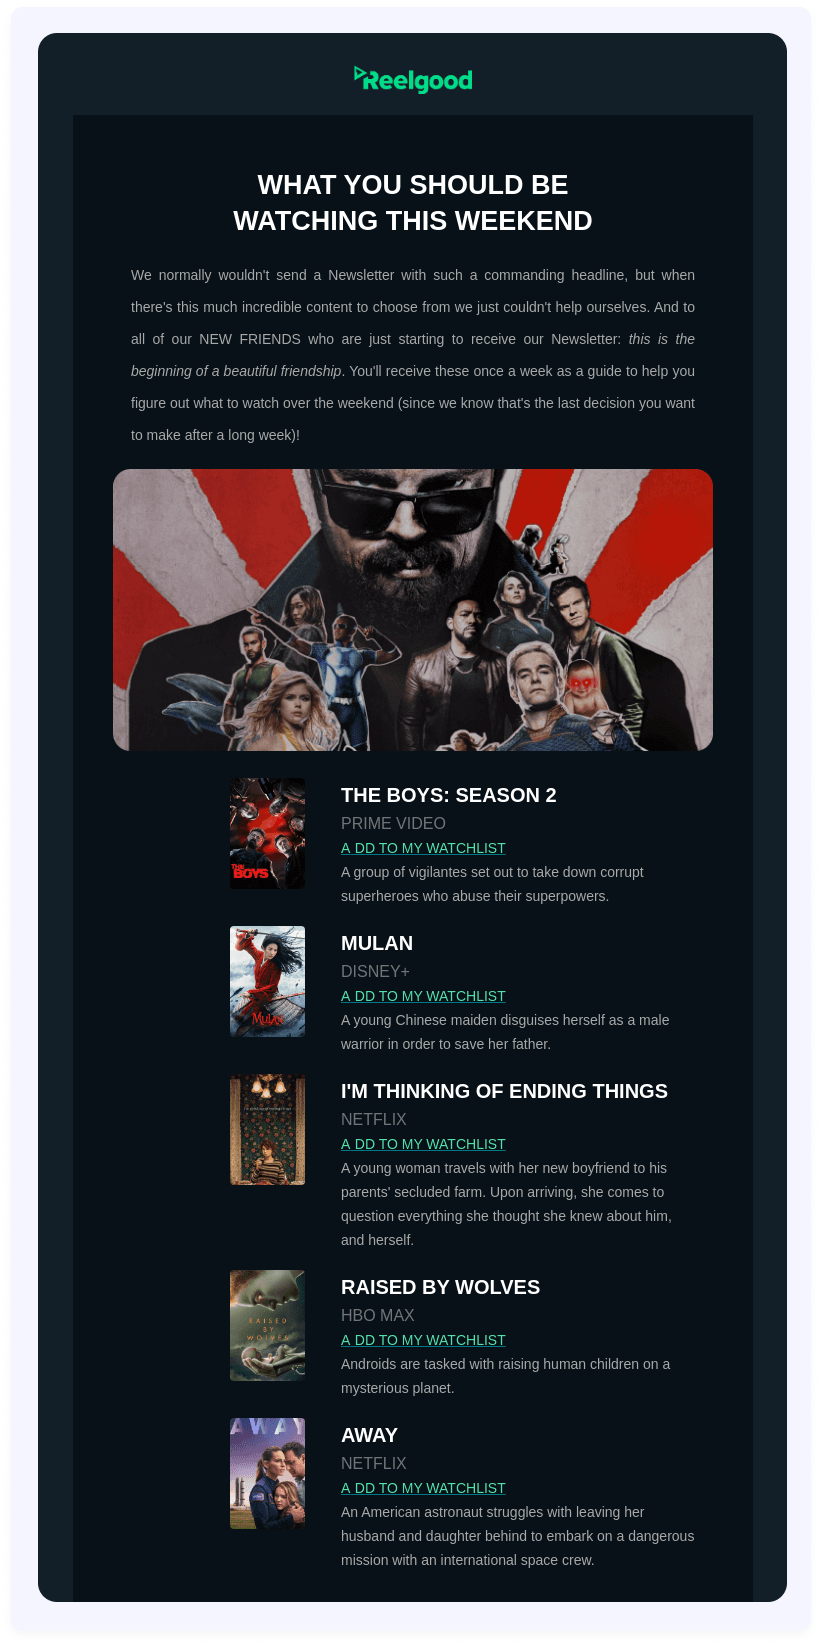 Weekend recommendation newsletter by ReelGood